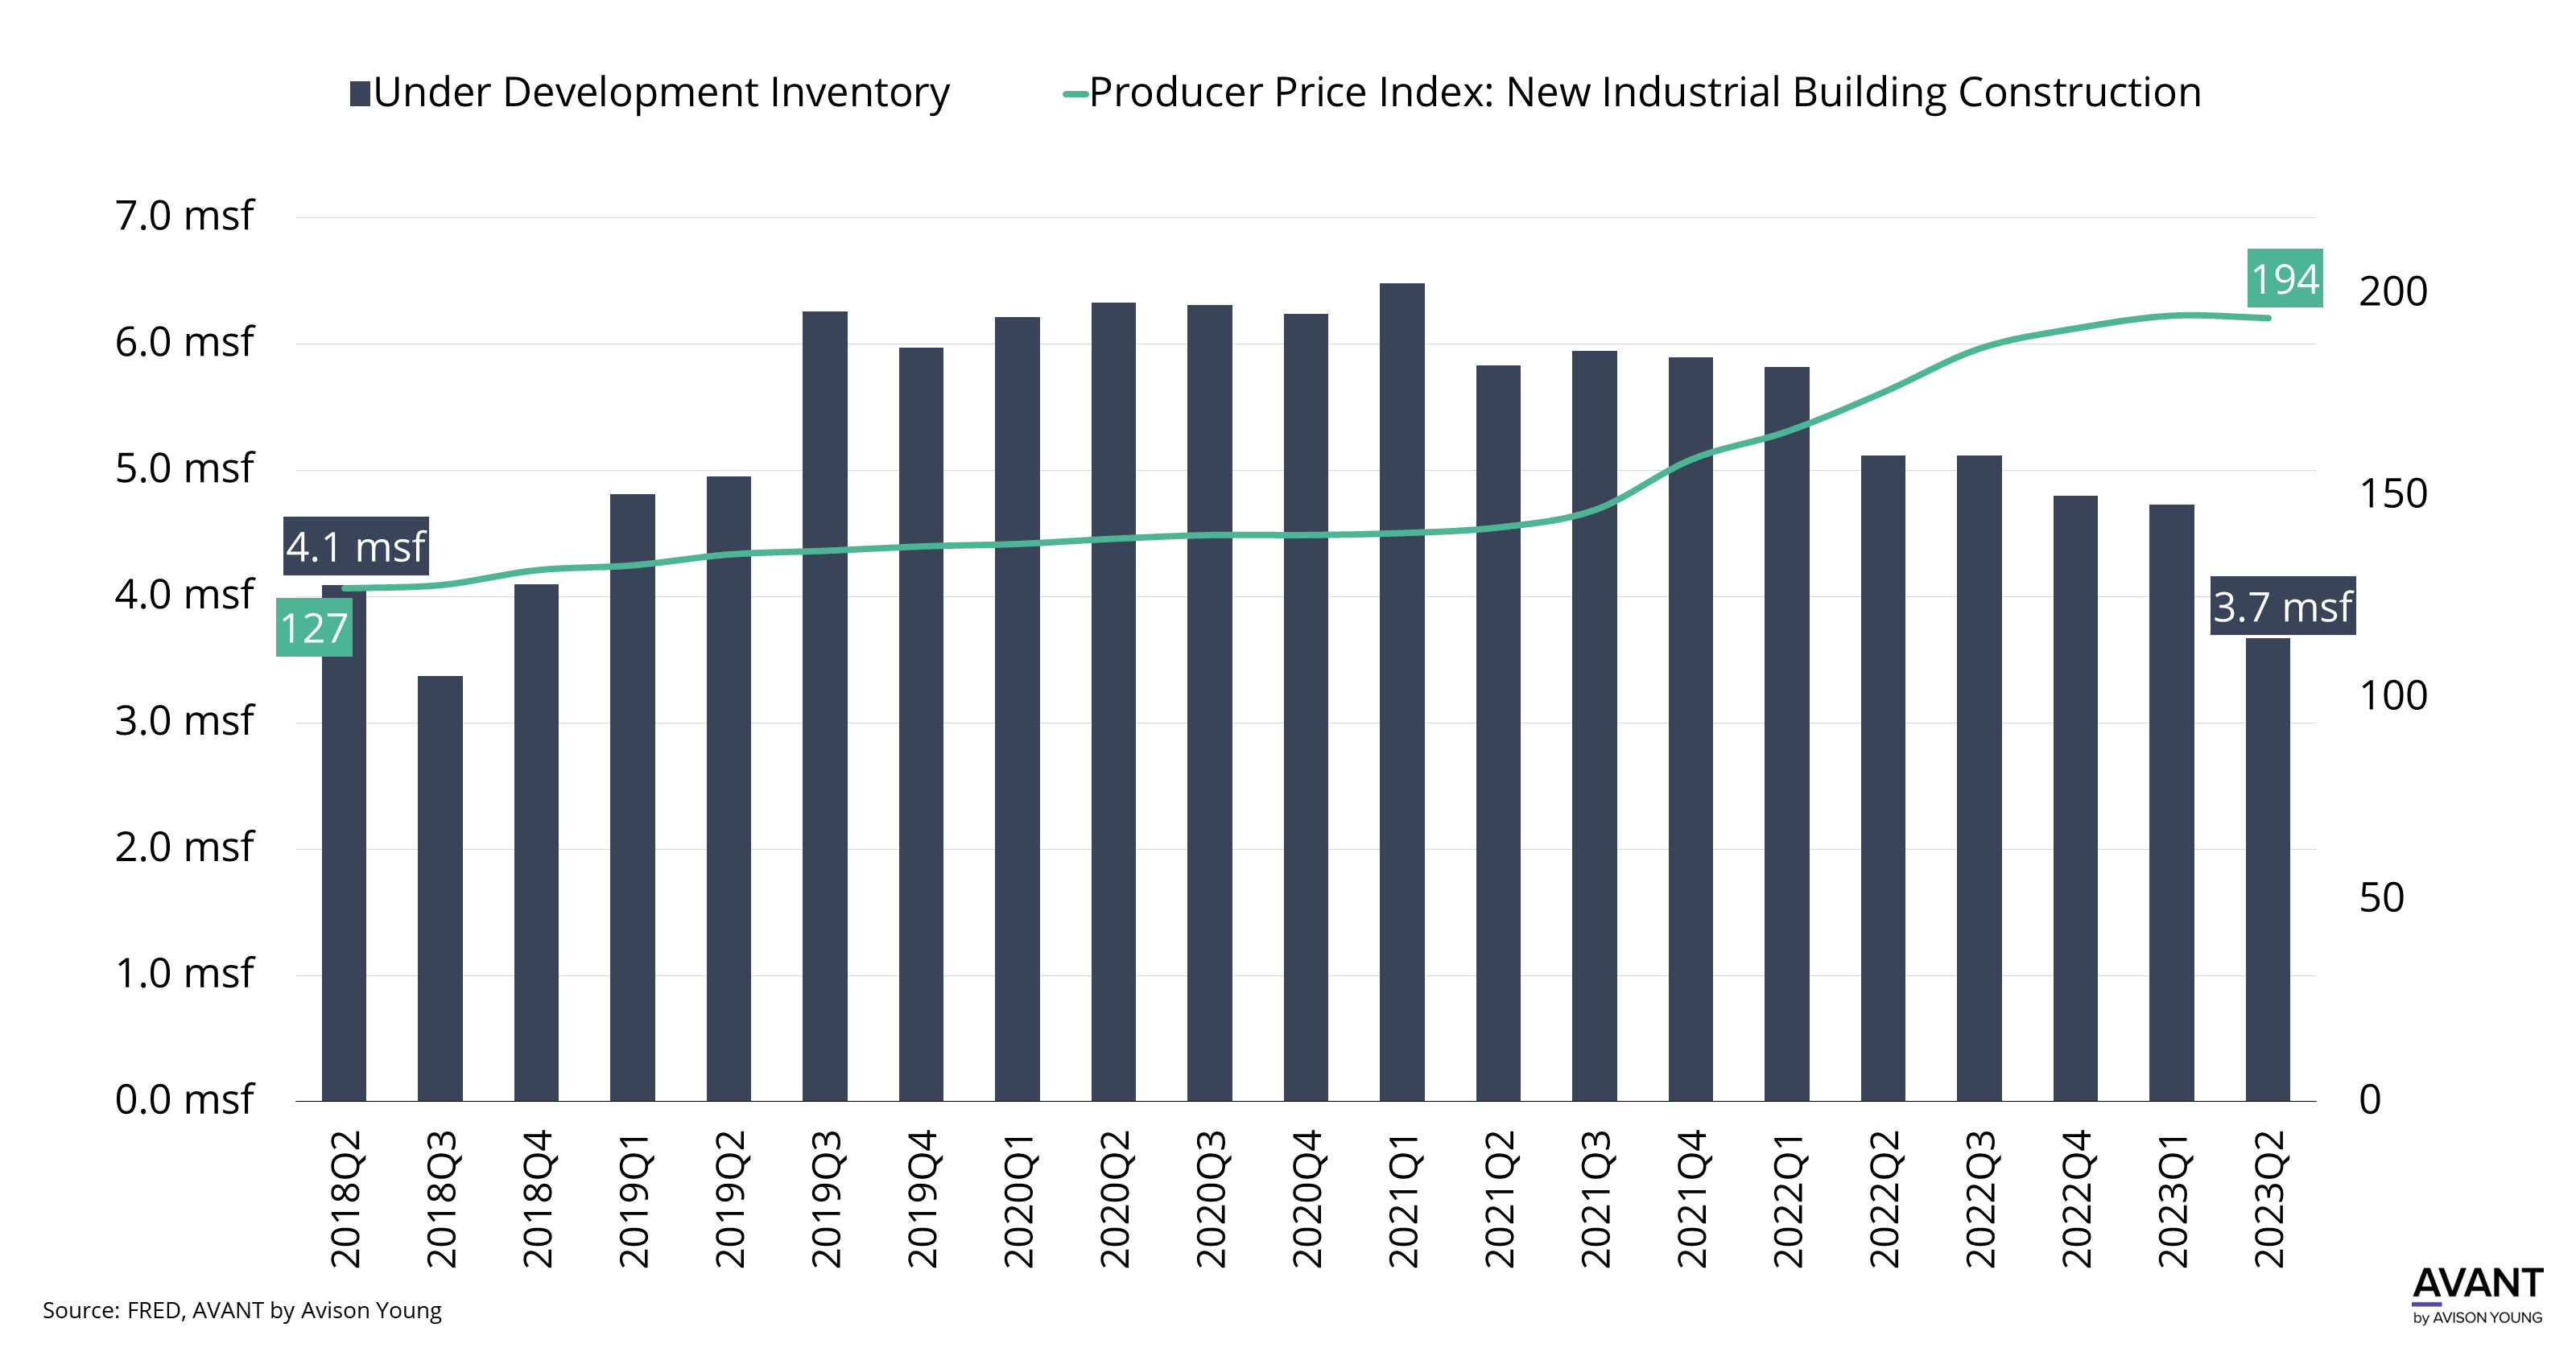 Chart compares the inventory of buildings under development from 2018 to Q2 2023 with Producer Price Index, or the change over time in selling prices of new industrial buildings.